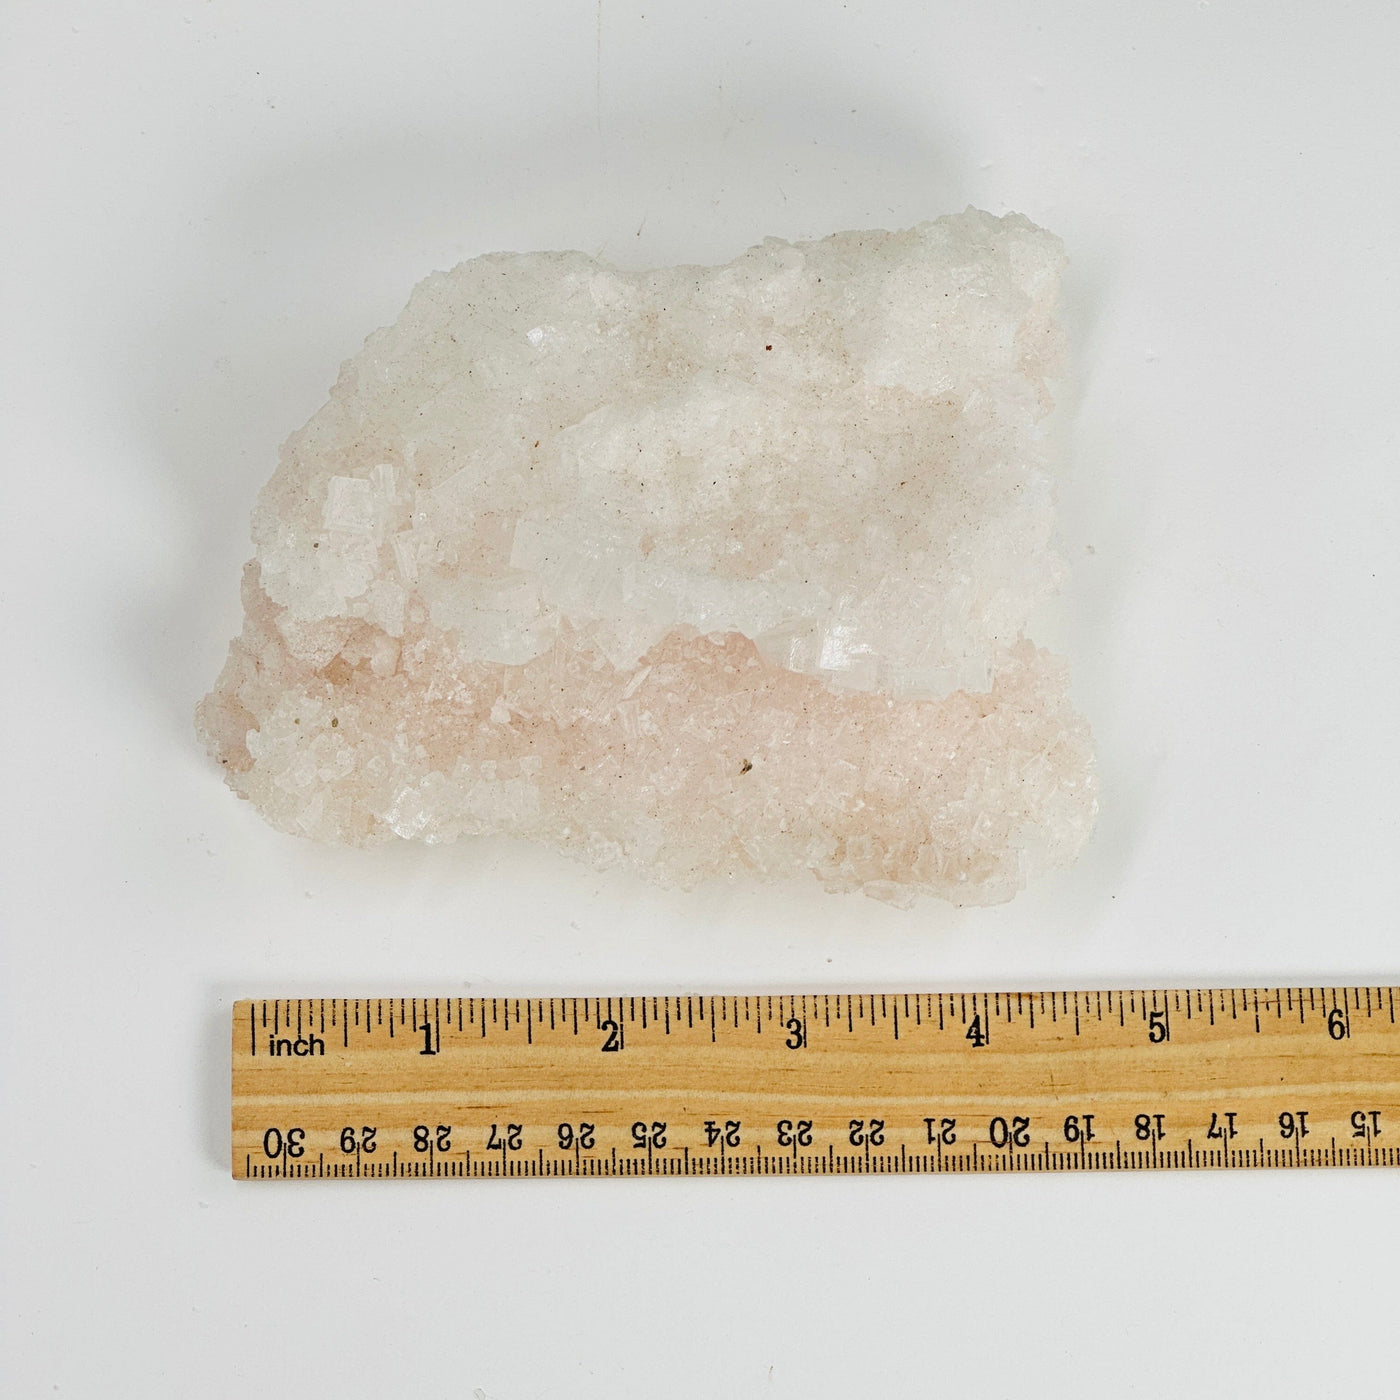 halite freeform next to a ruler for size reference